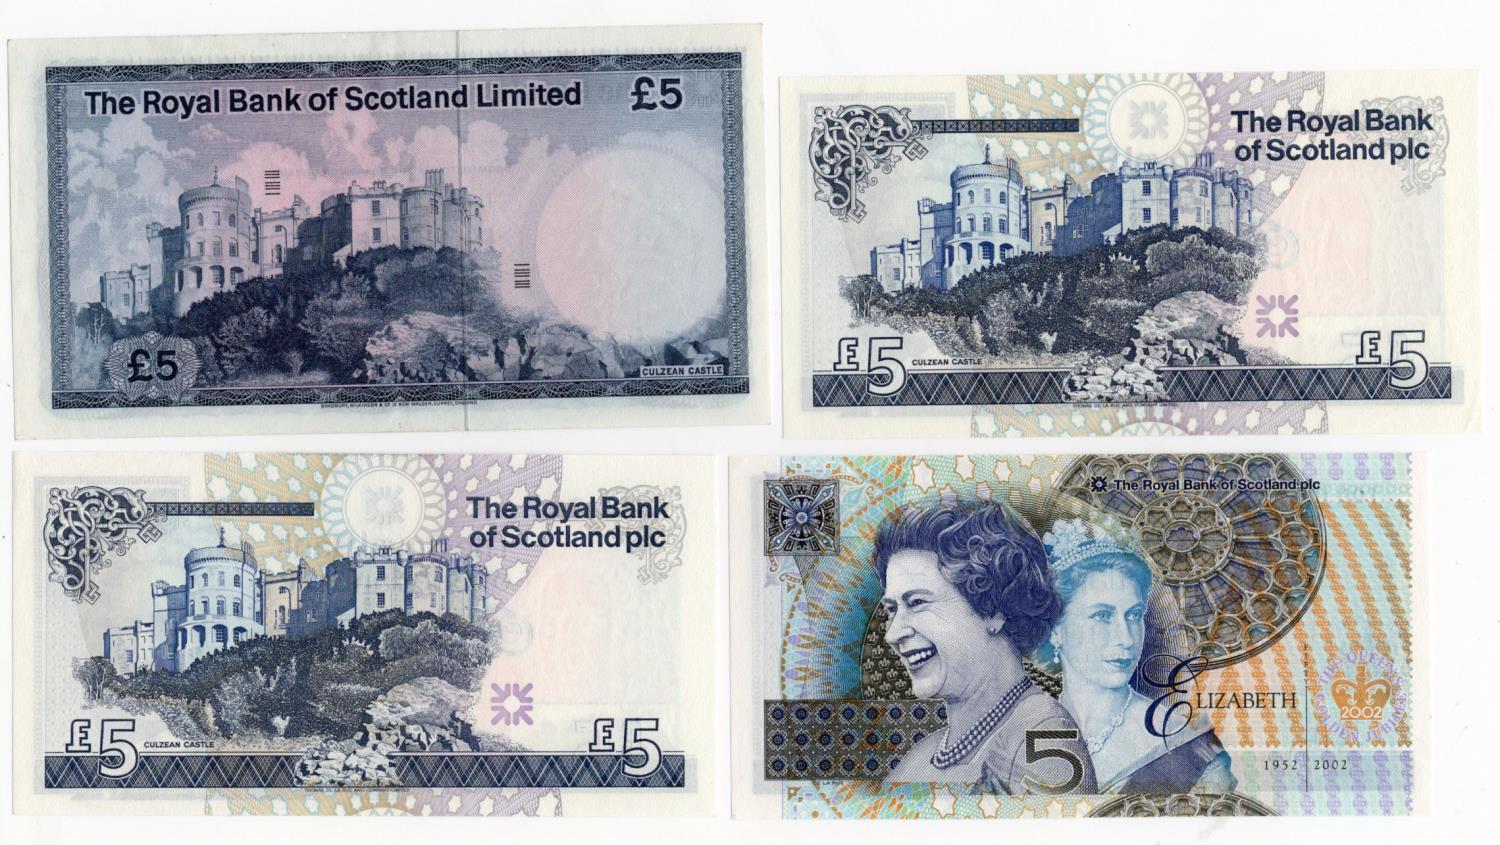 Scotland, Royal Bank of Scotland Limited (4), 5 Pounds dated 1st March 1974 serial A/21 588922 ( - Image 2 of 2